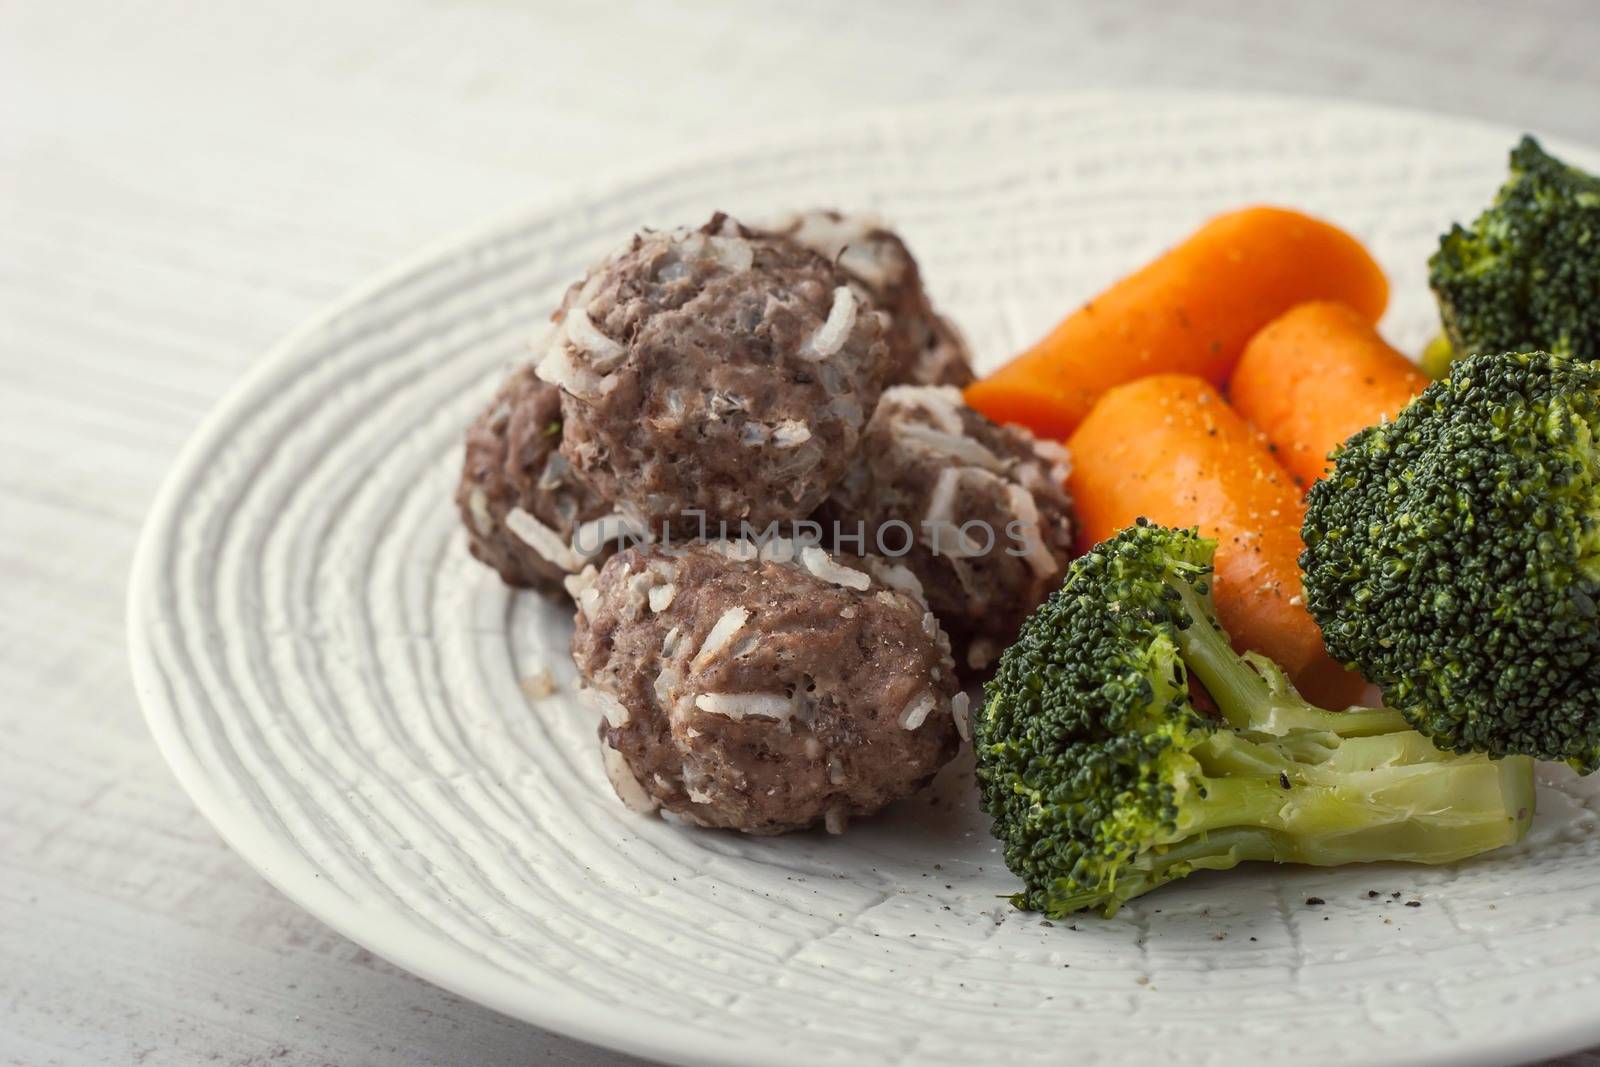 Broccoli and carrots with meatballs by Deniskarpenkov